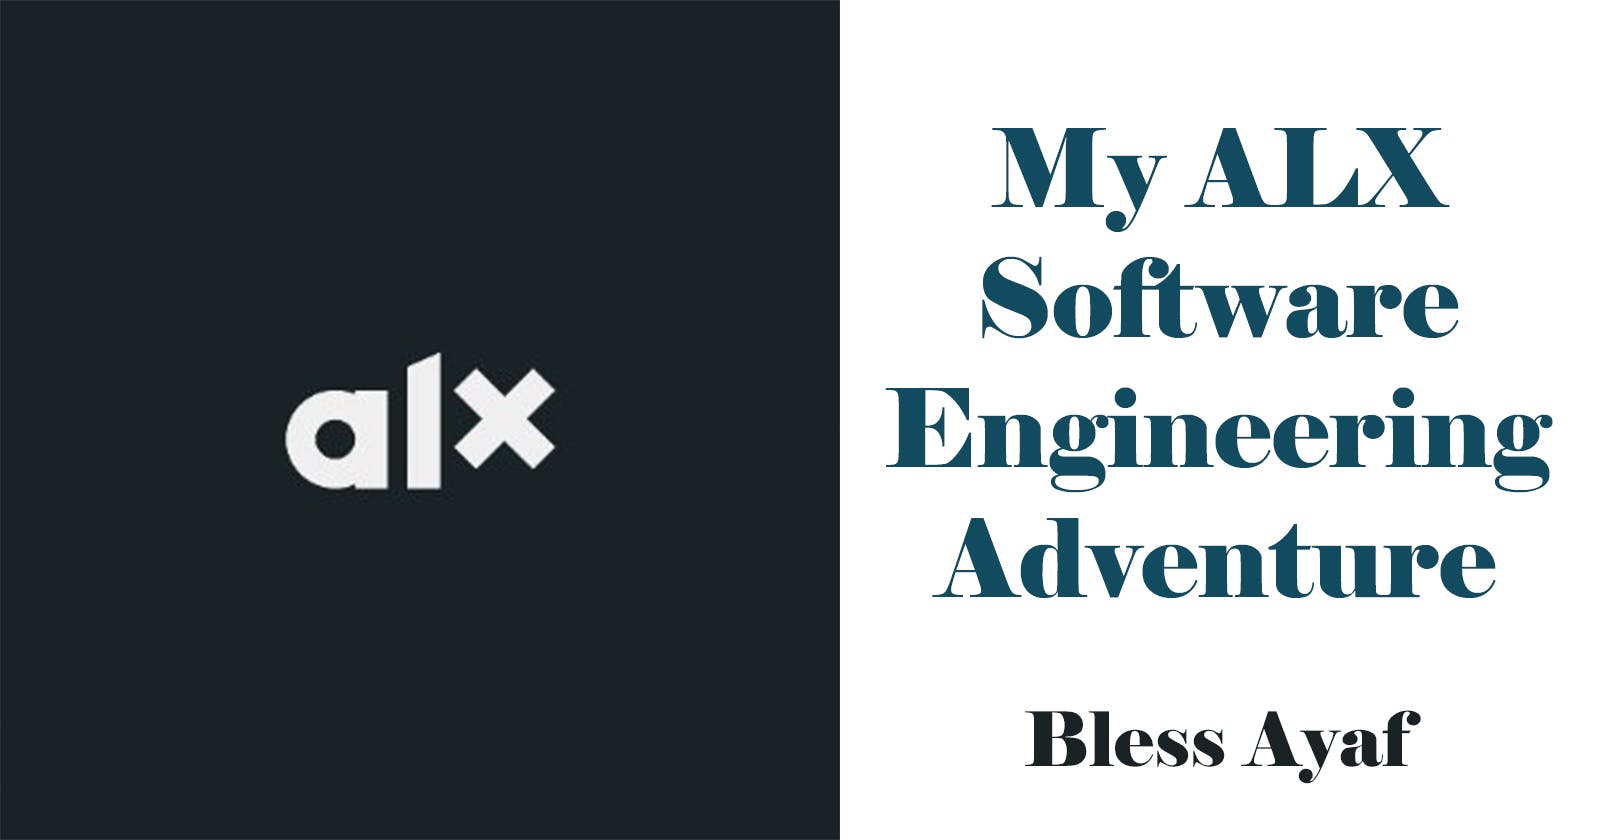 My ALX Software Engineering Adventure: Learning, Growing, and Thriving